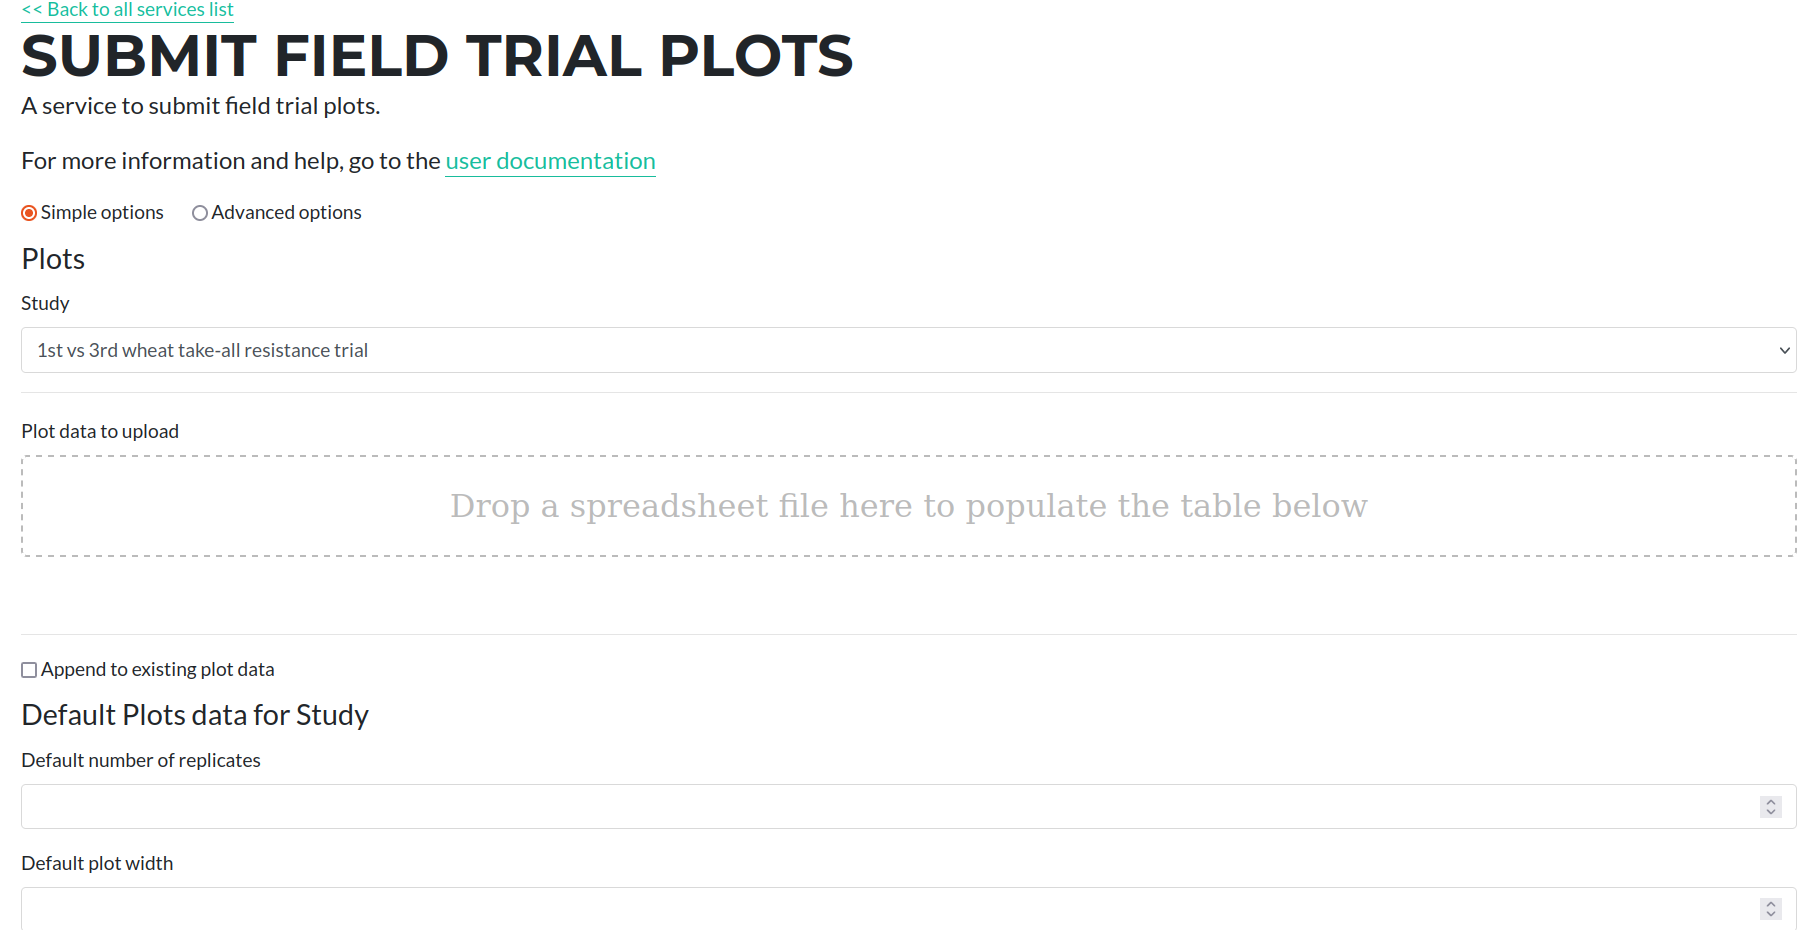 The form for submitting field trial plots